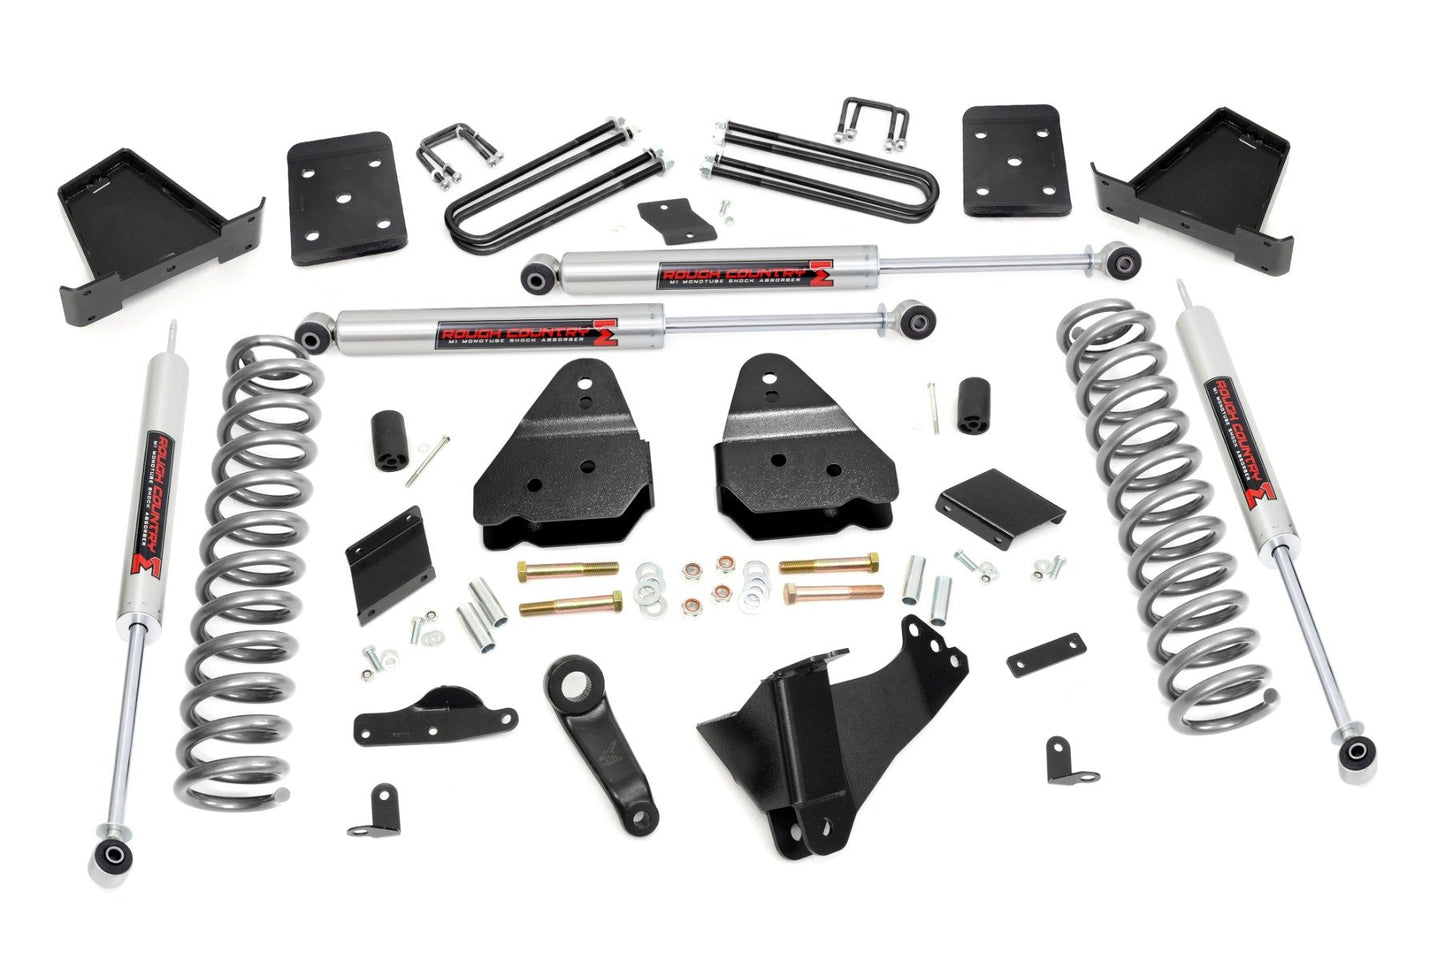 Rough Country (53440) 4.5 Inch Lift Kit | No OVLD | M1 | Ford F-250 Super Duty 4WD (2015-2016)